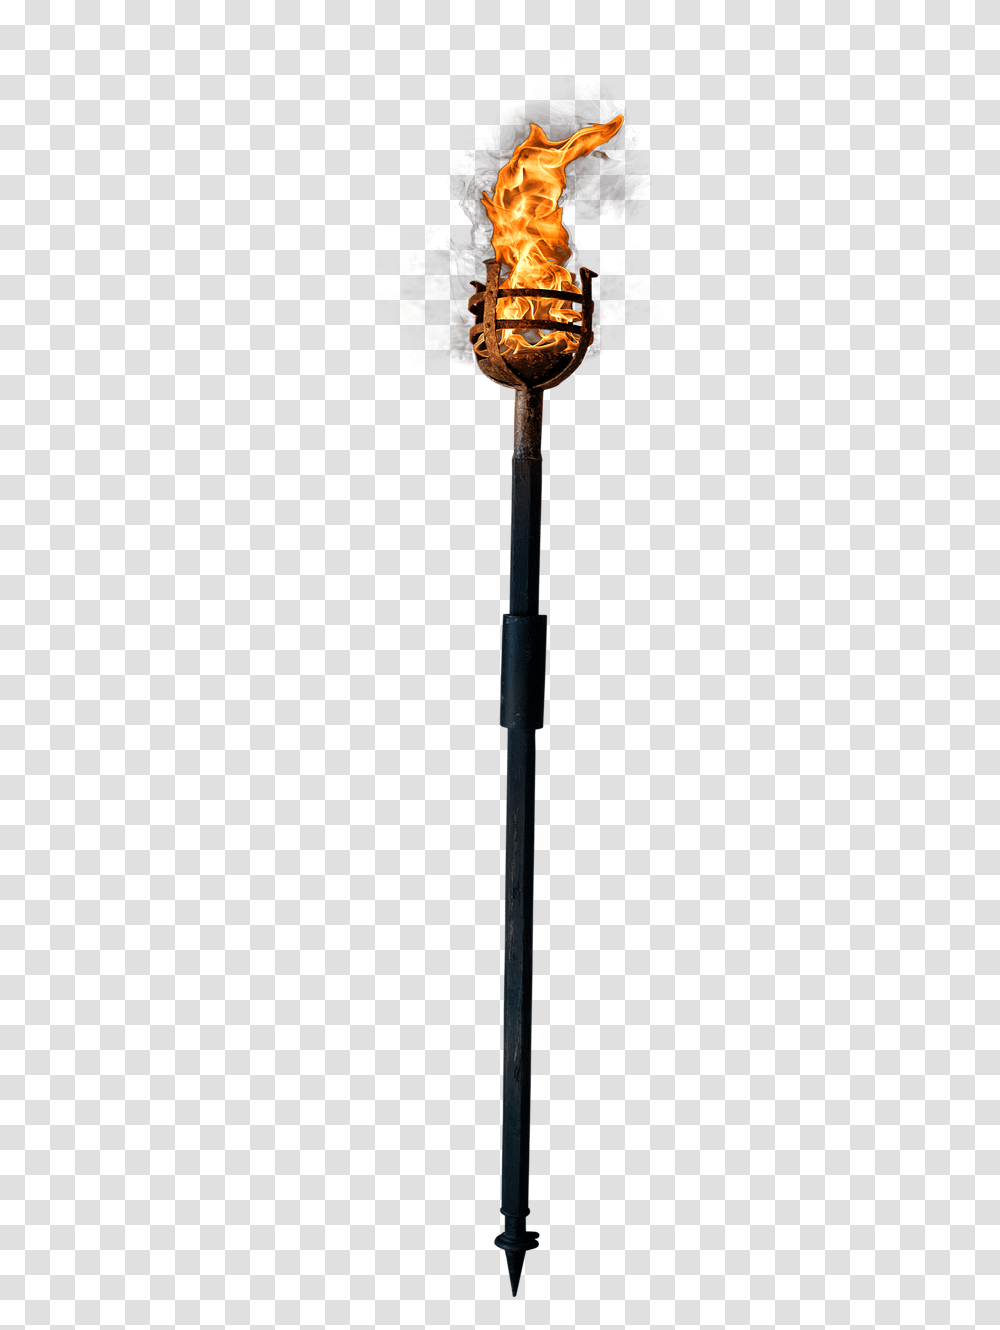 Torch Fire Flame Free Image On Pixabay Rifle, Sword, Blade, Weapon, Weaponry Transparent Png